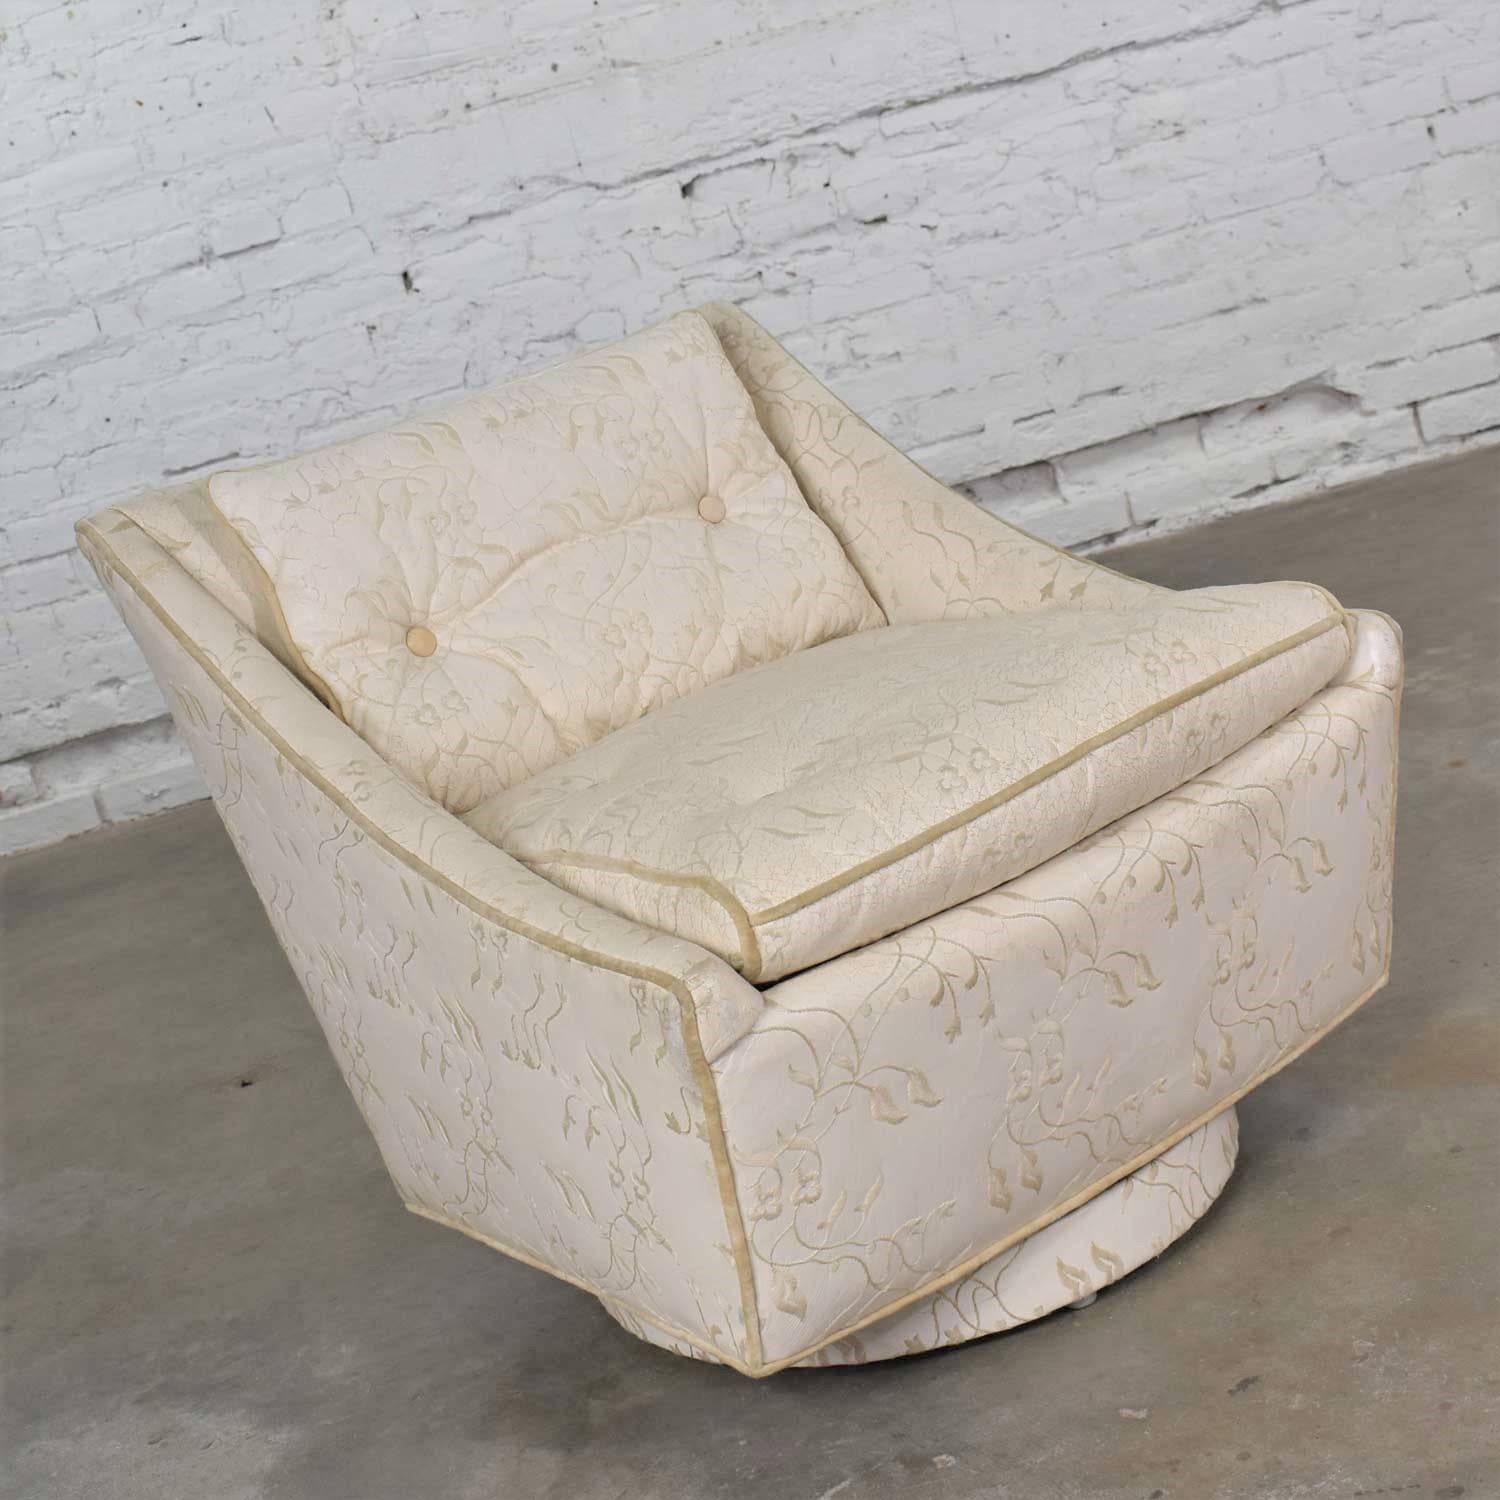 Lovely petite Art Deco swivel chair in white embroidered leather by Oxford Ltd. of Chicago. It is in wonderful vintage condition. The leather/leatherette has lots of patina including crazing and cracking but no holes. We have cleaned it and love the